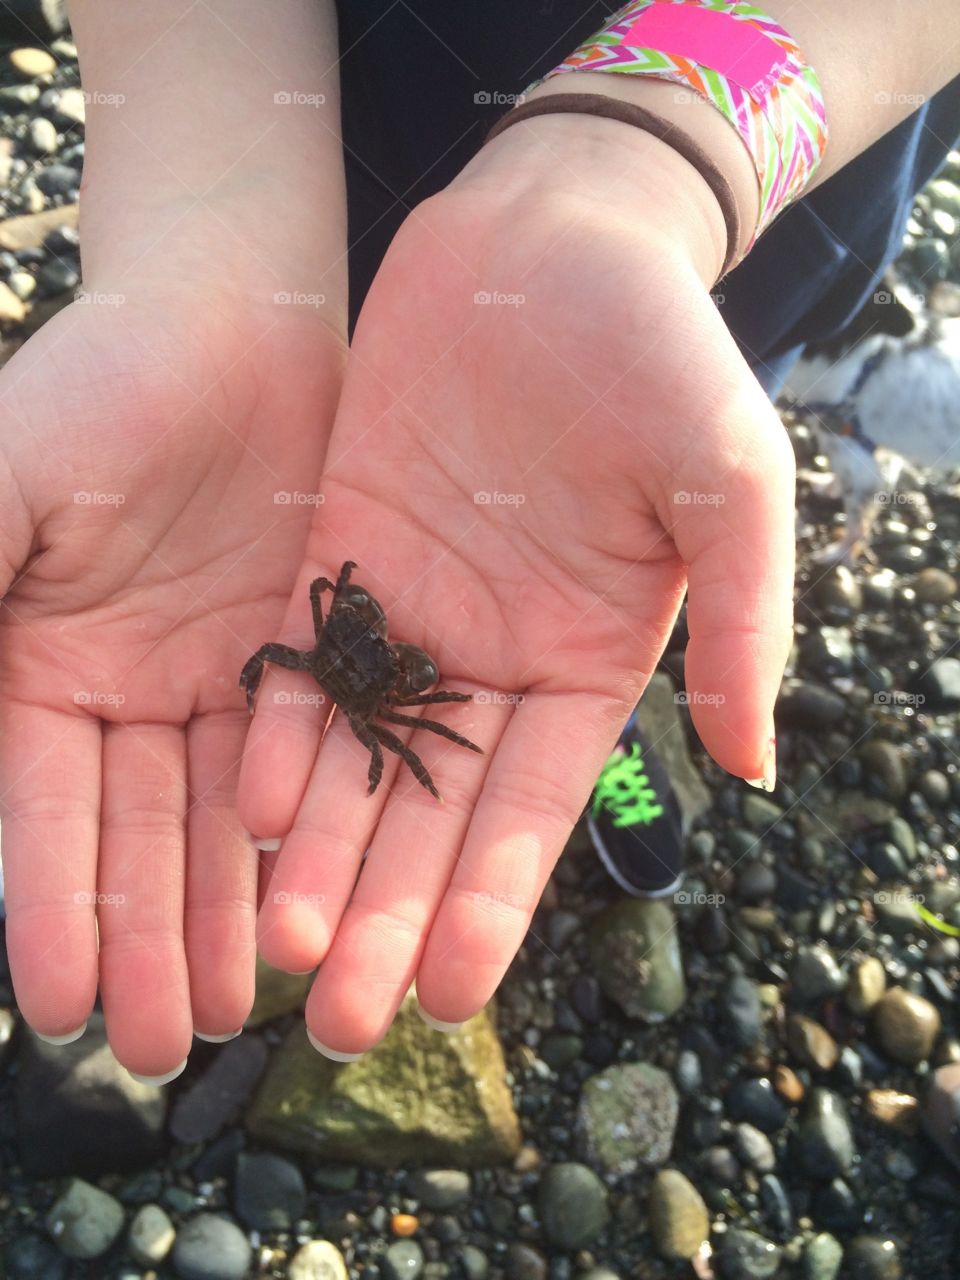 A young girl holding a crab in her palms on a beach.